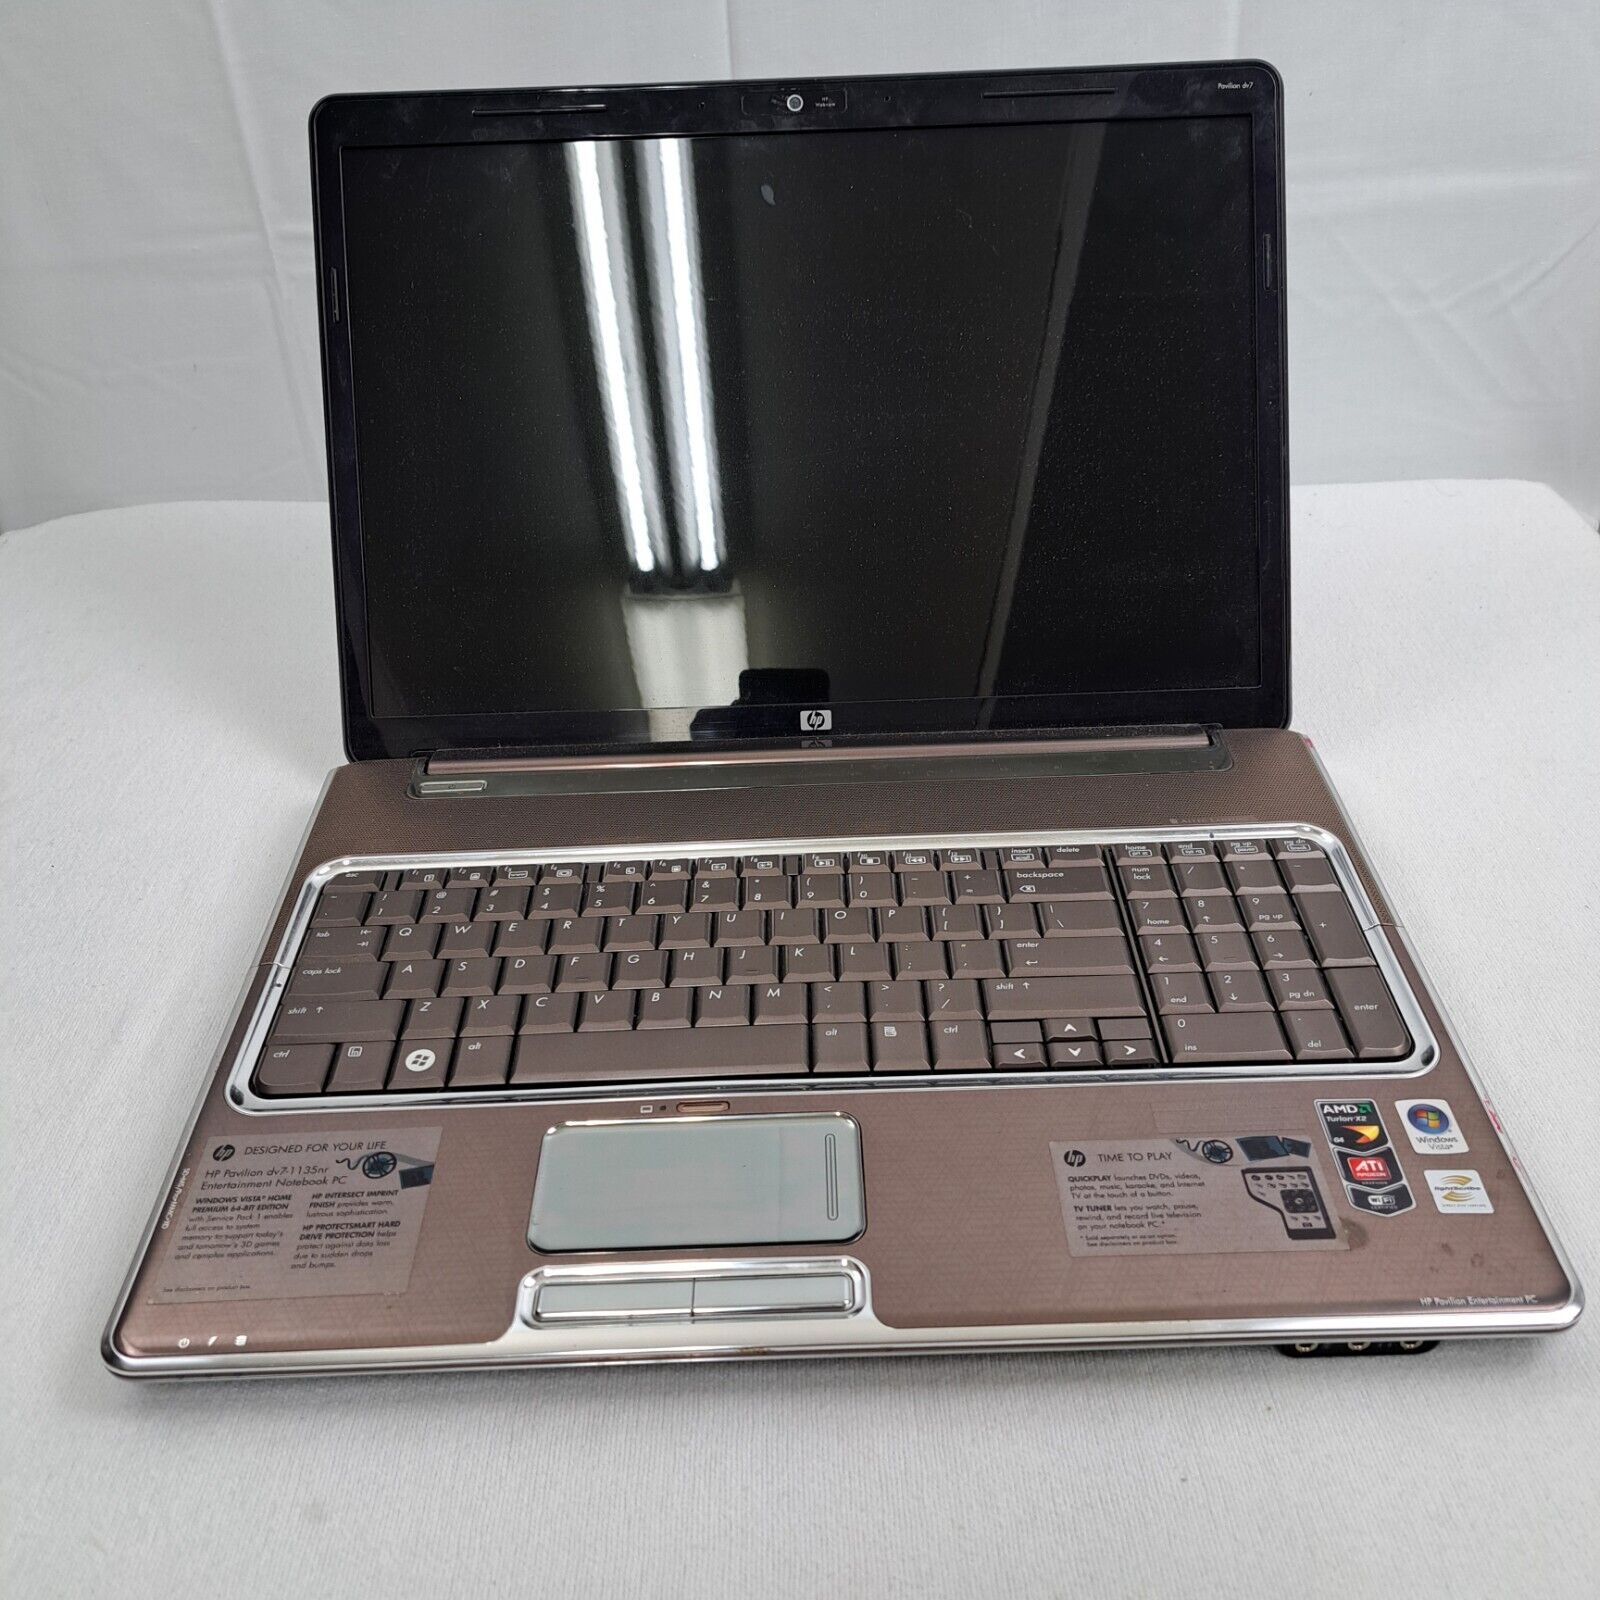 HP Pavillion dv7-135nr Entertainment Notebook PC NOT TESTED AS IS